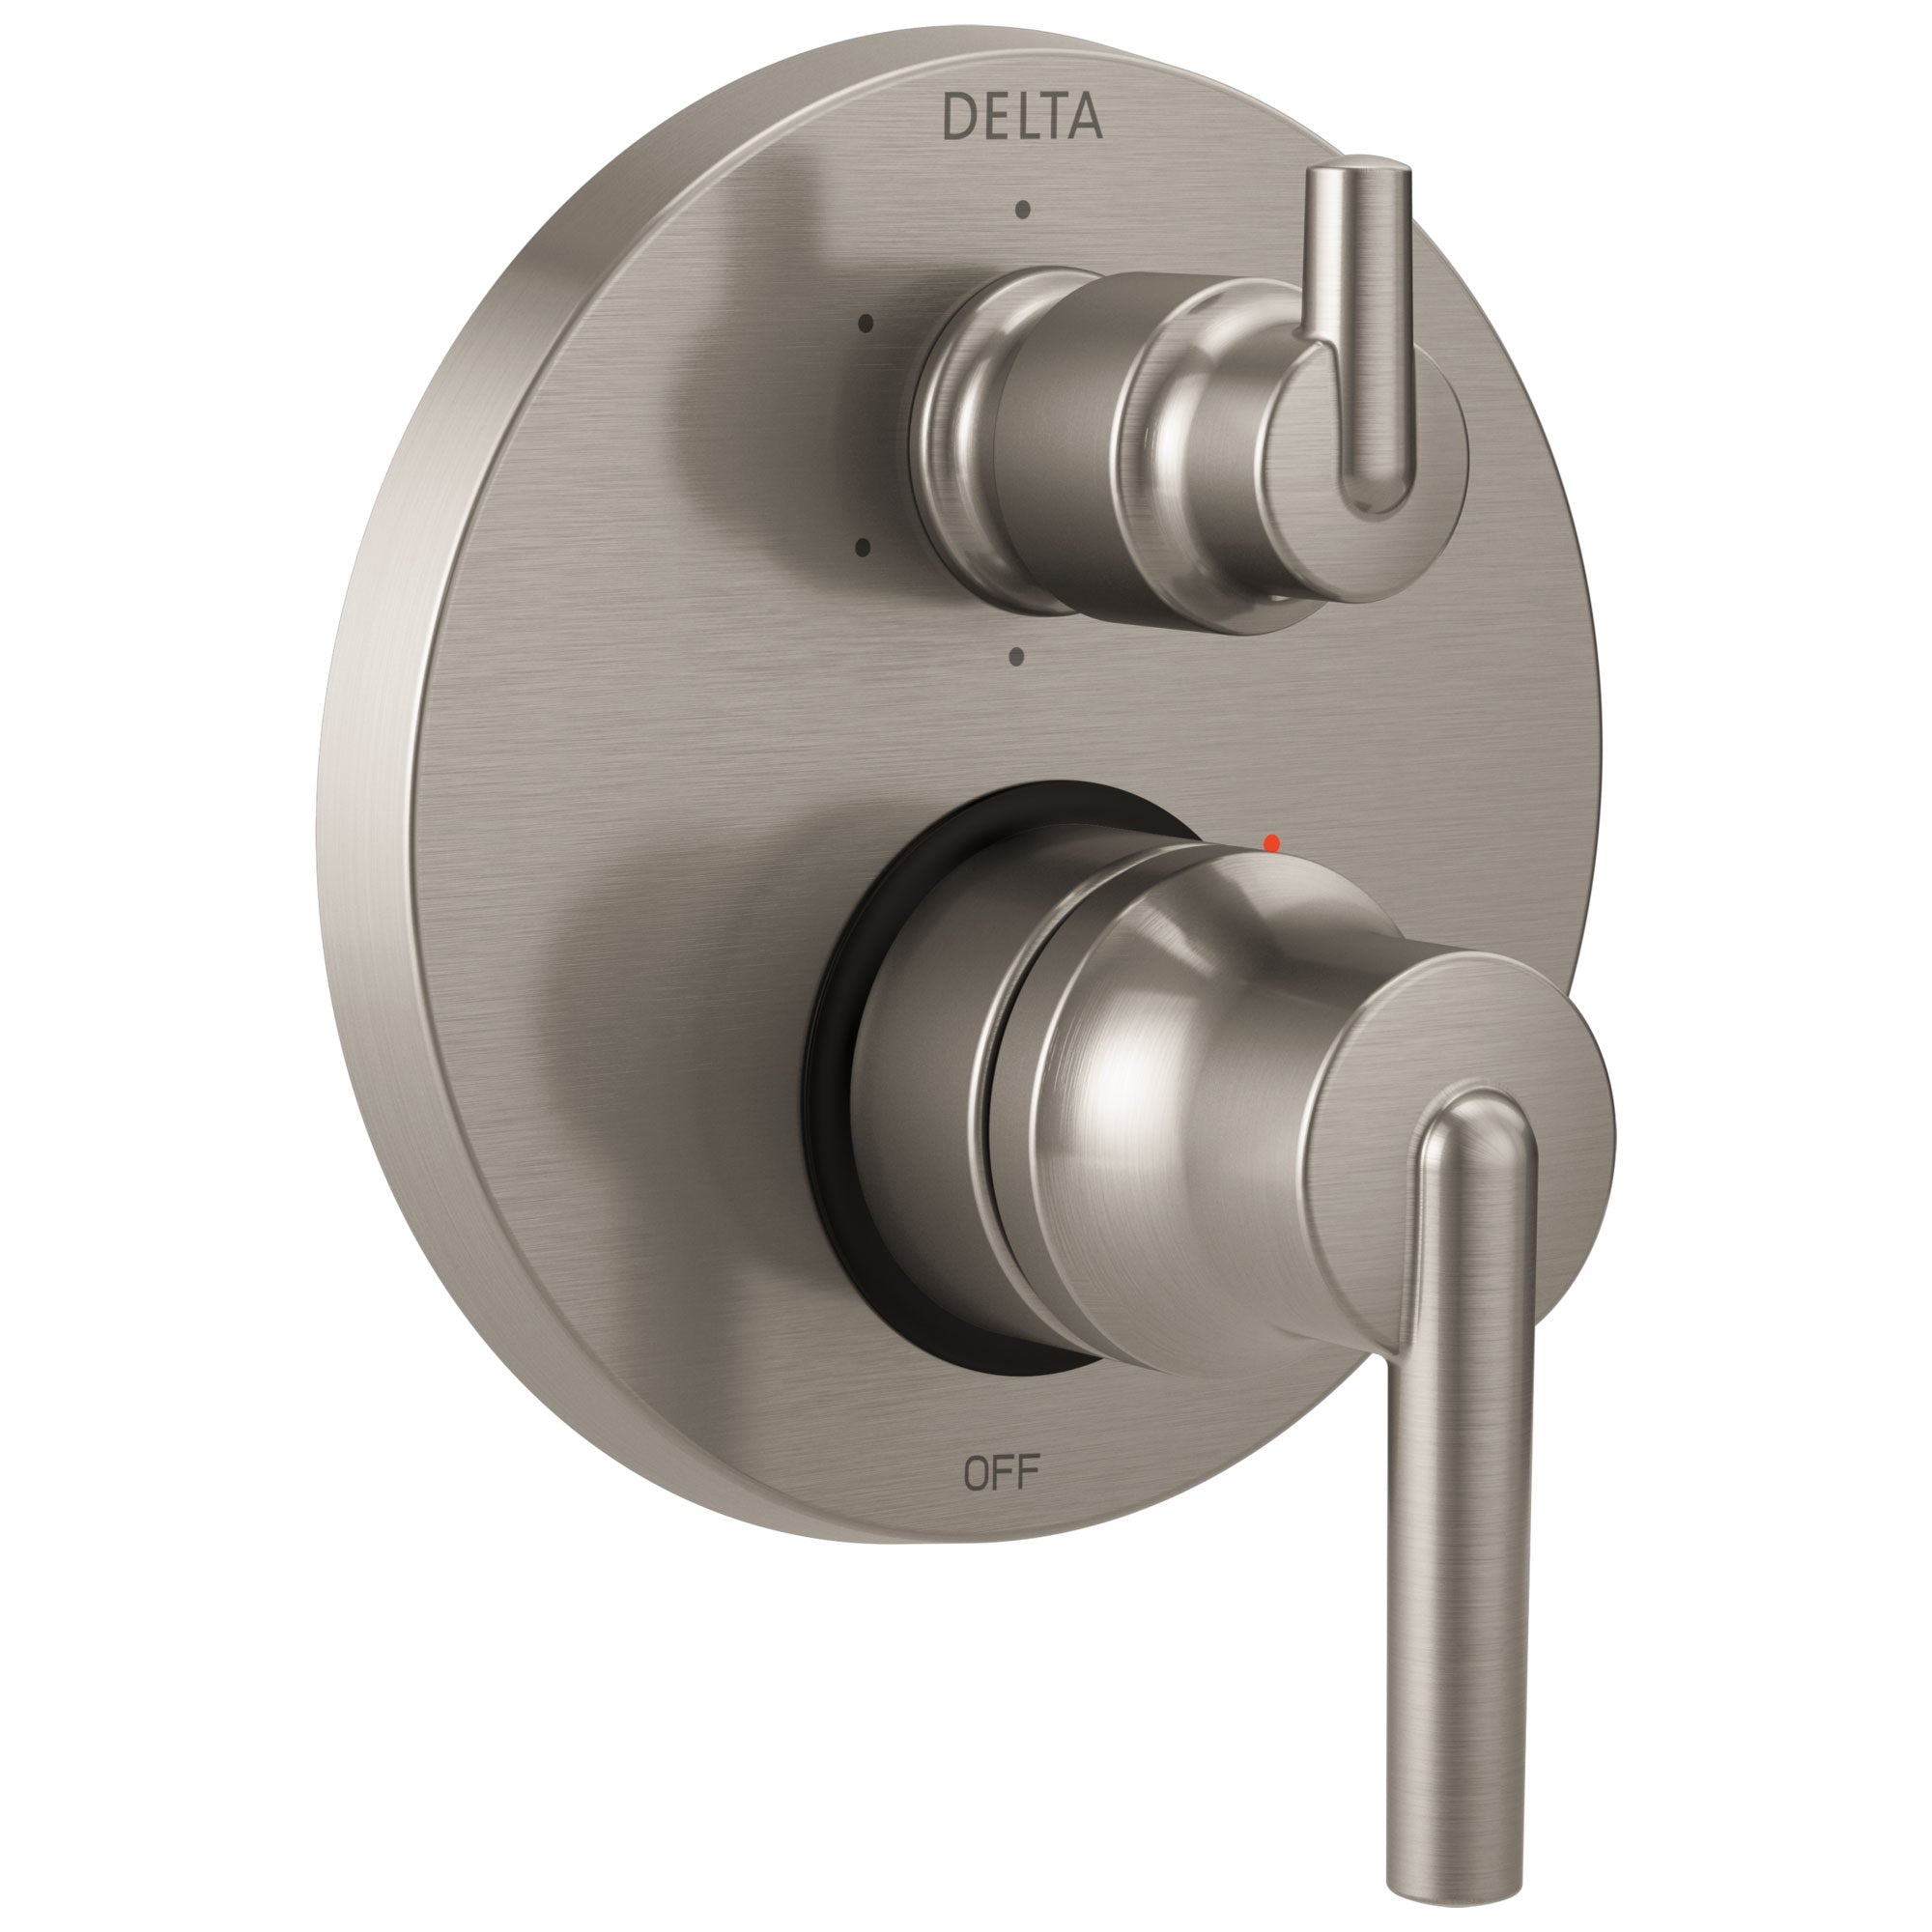 Delta Trinsic Collection Stainless Steel Finish Shower Faucet Control Handle with 6-Setting Integrated Diverter Trim (Requires Valve) DT24959SS